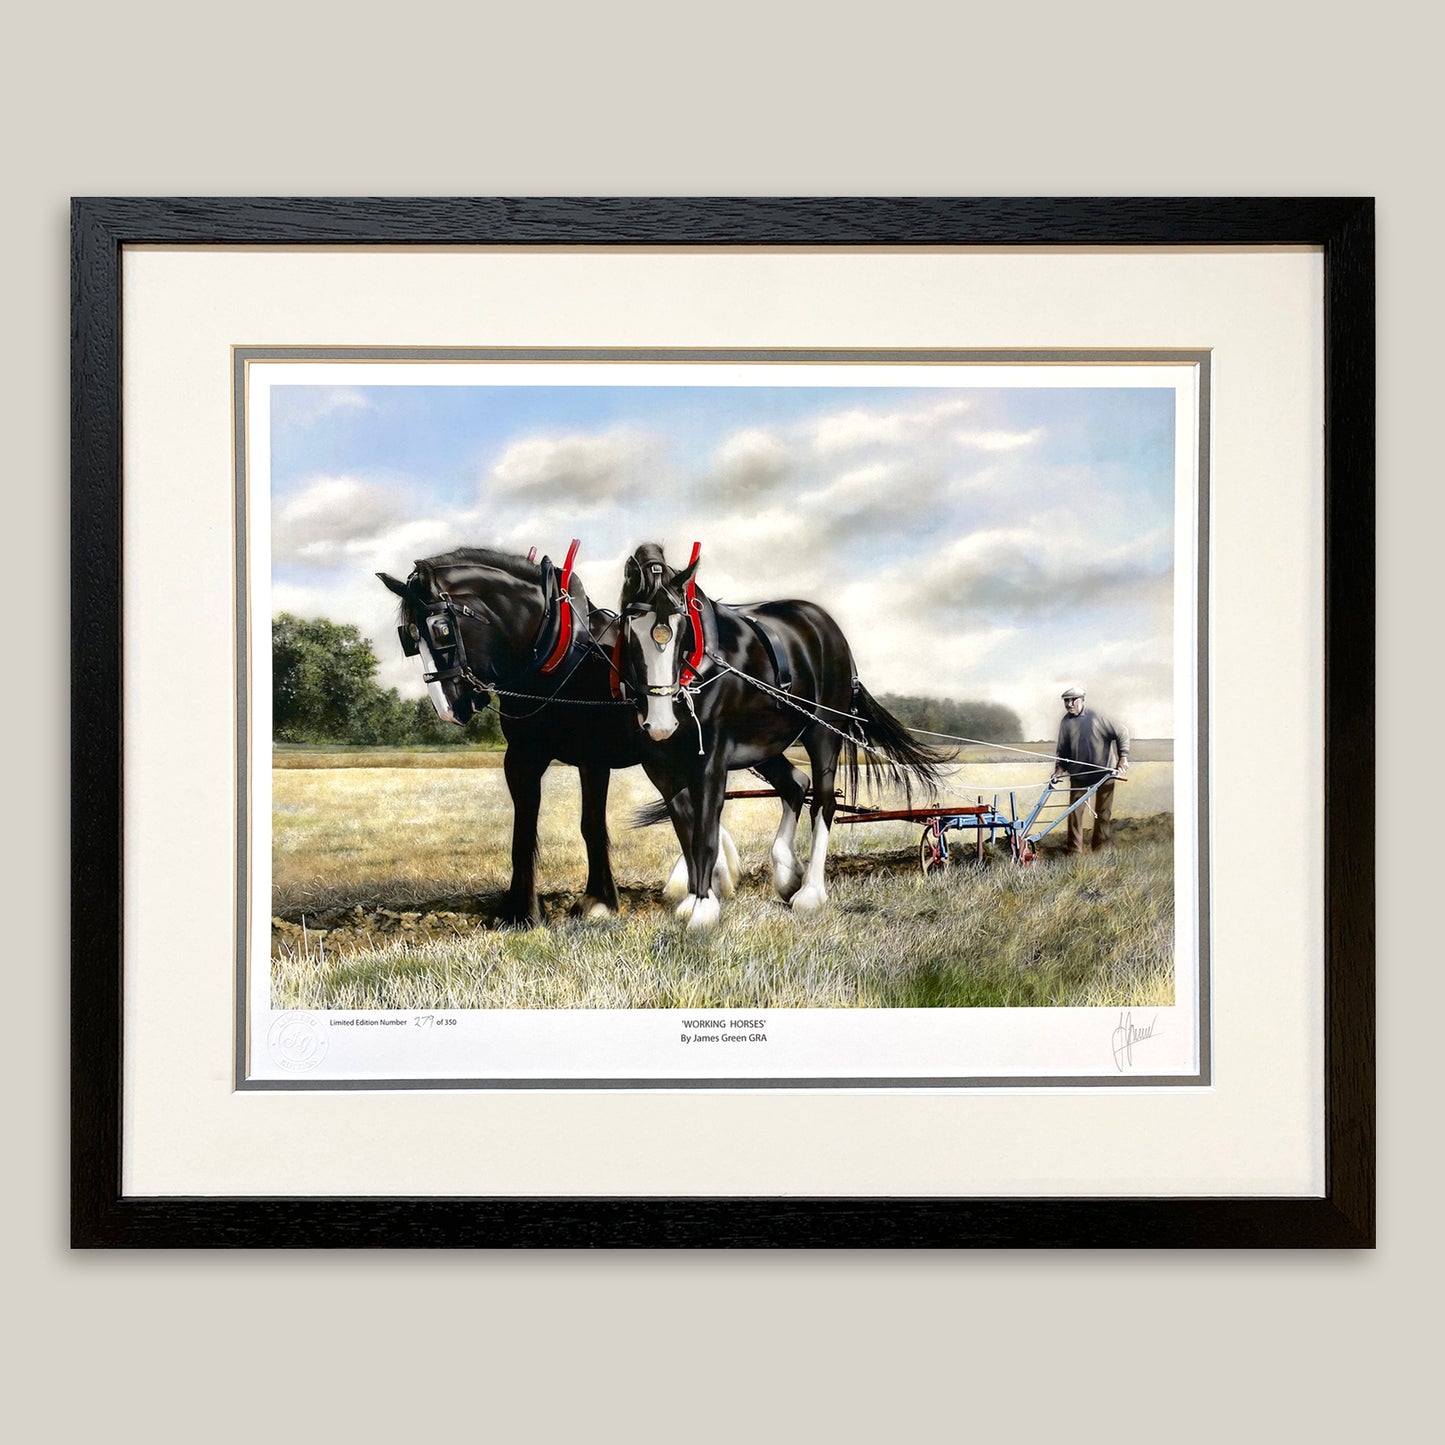 Working Horses Limited Edition Print